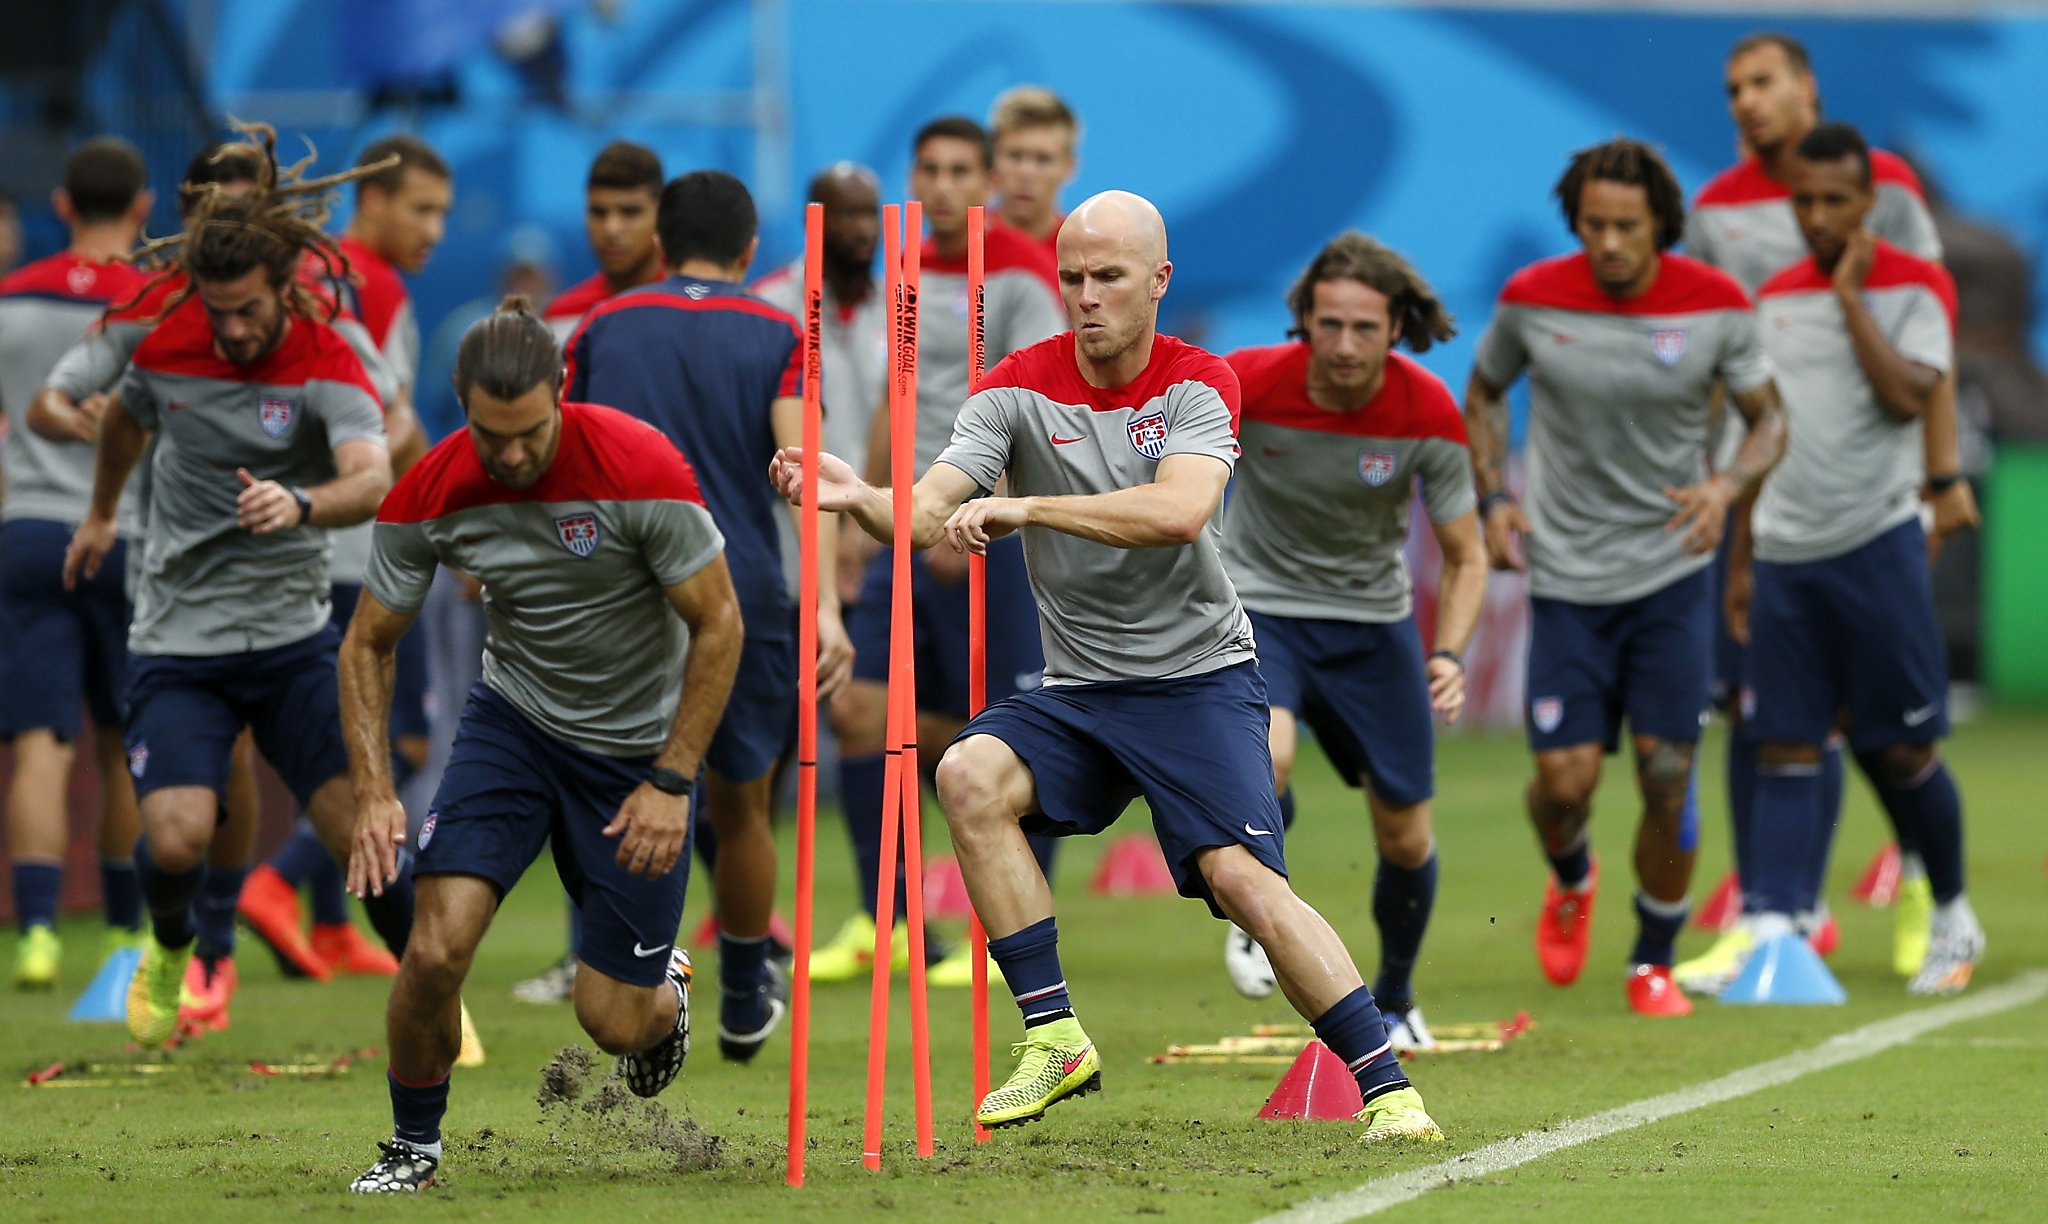 For U.S. World Cup team, it'll be glory or chaos